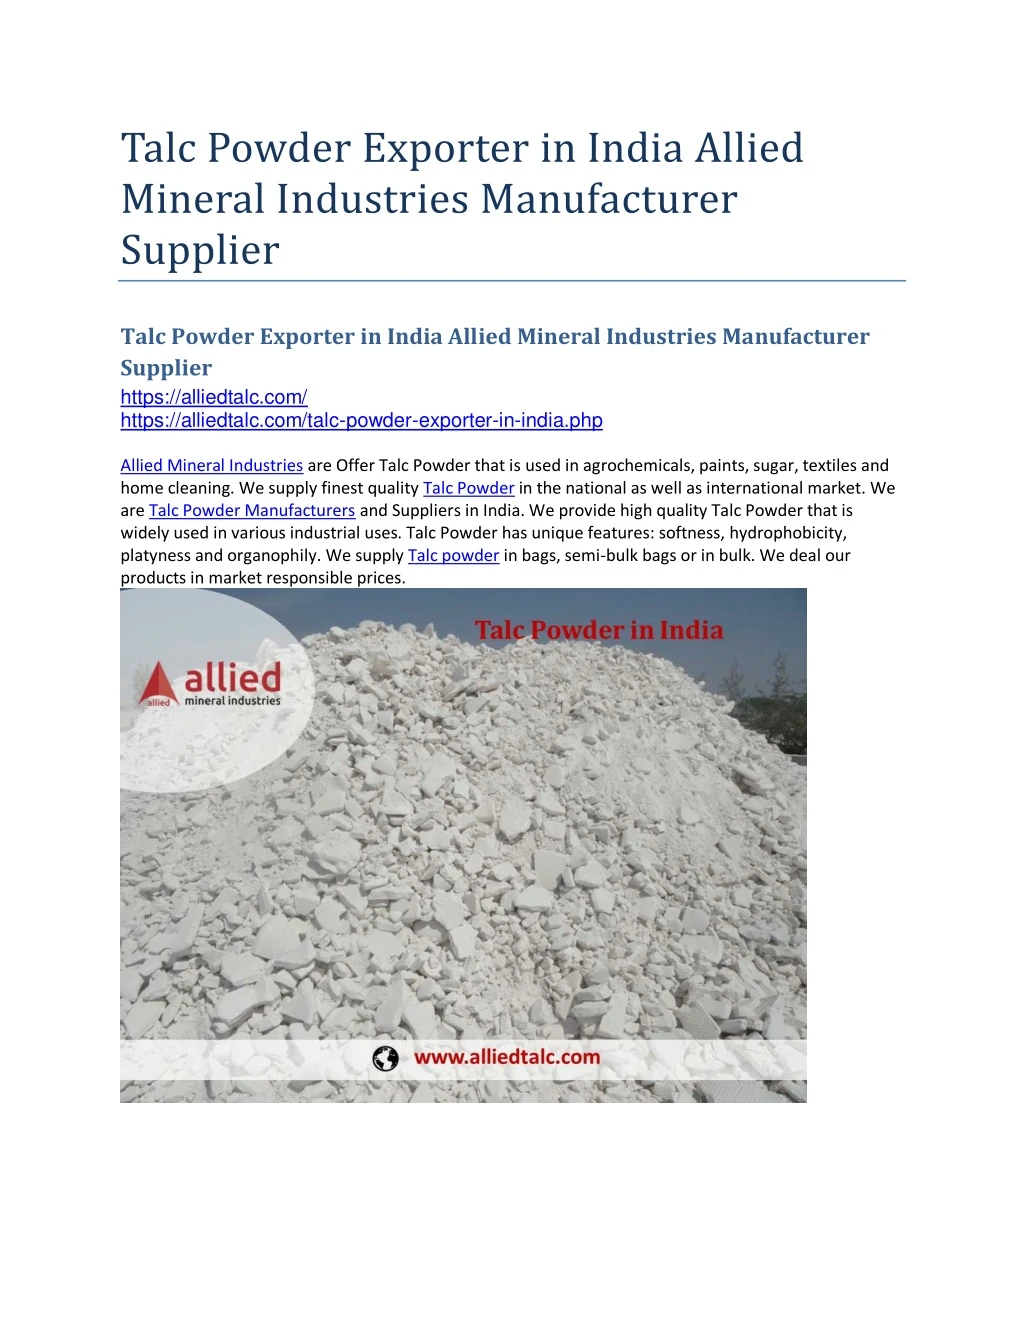 talc powder exporter in india allied mineral